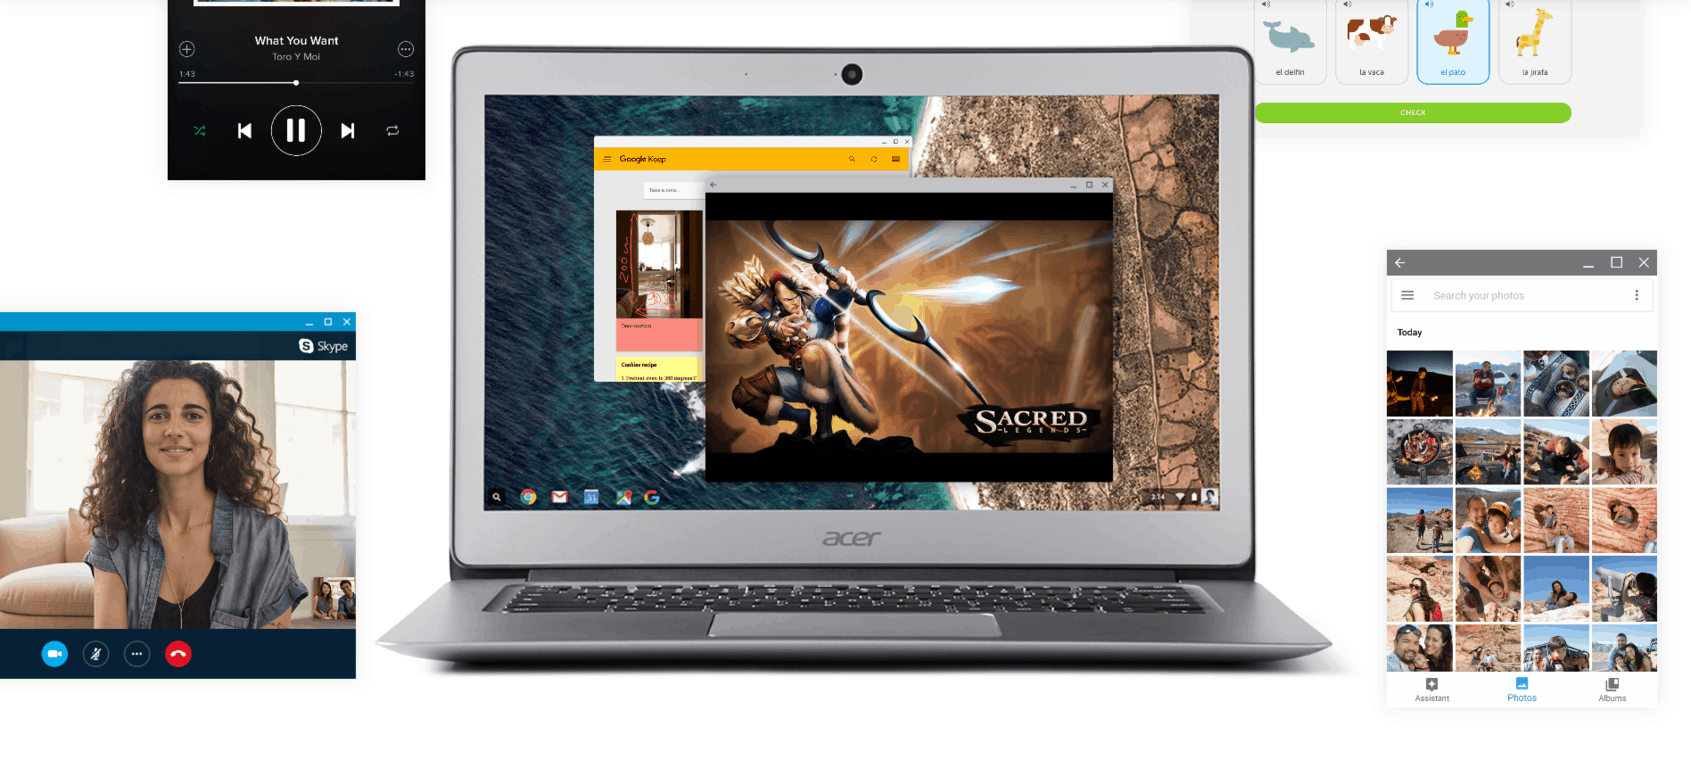 Google apparently drops plans to allow dual-booting Chromebooks - OnMSFT.com - May 15, 2019